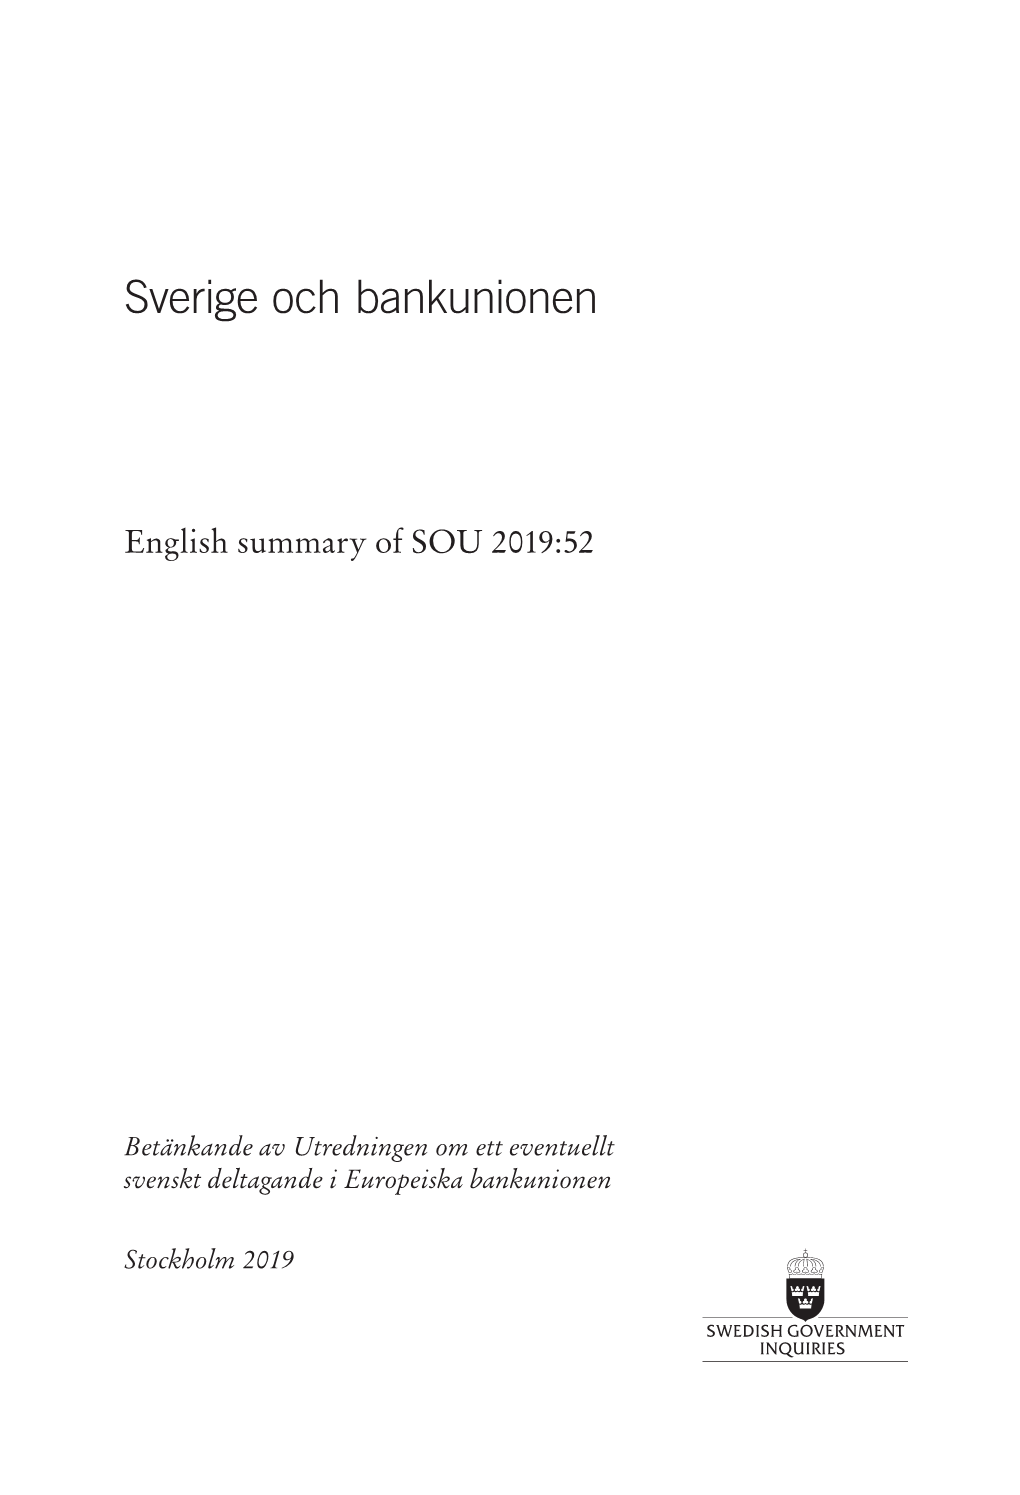 Sweden and the Banking Union Will Decrease